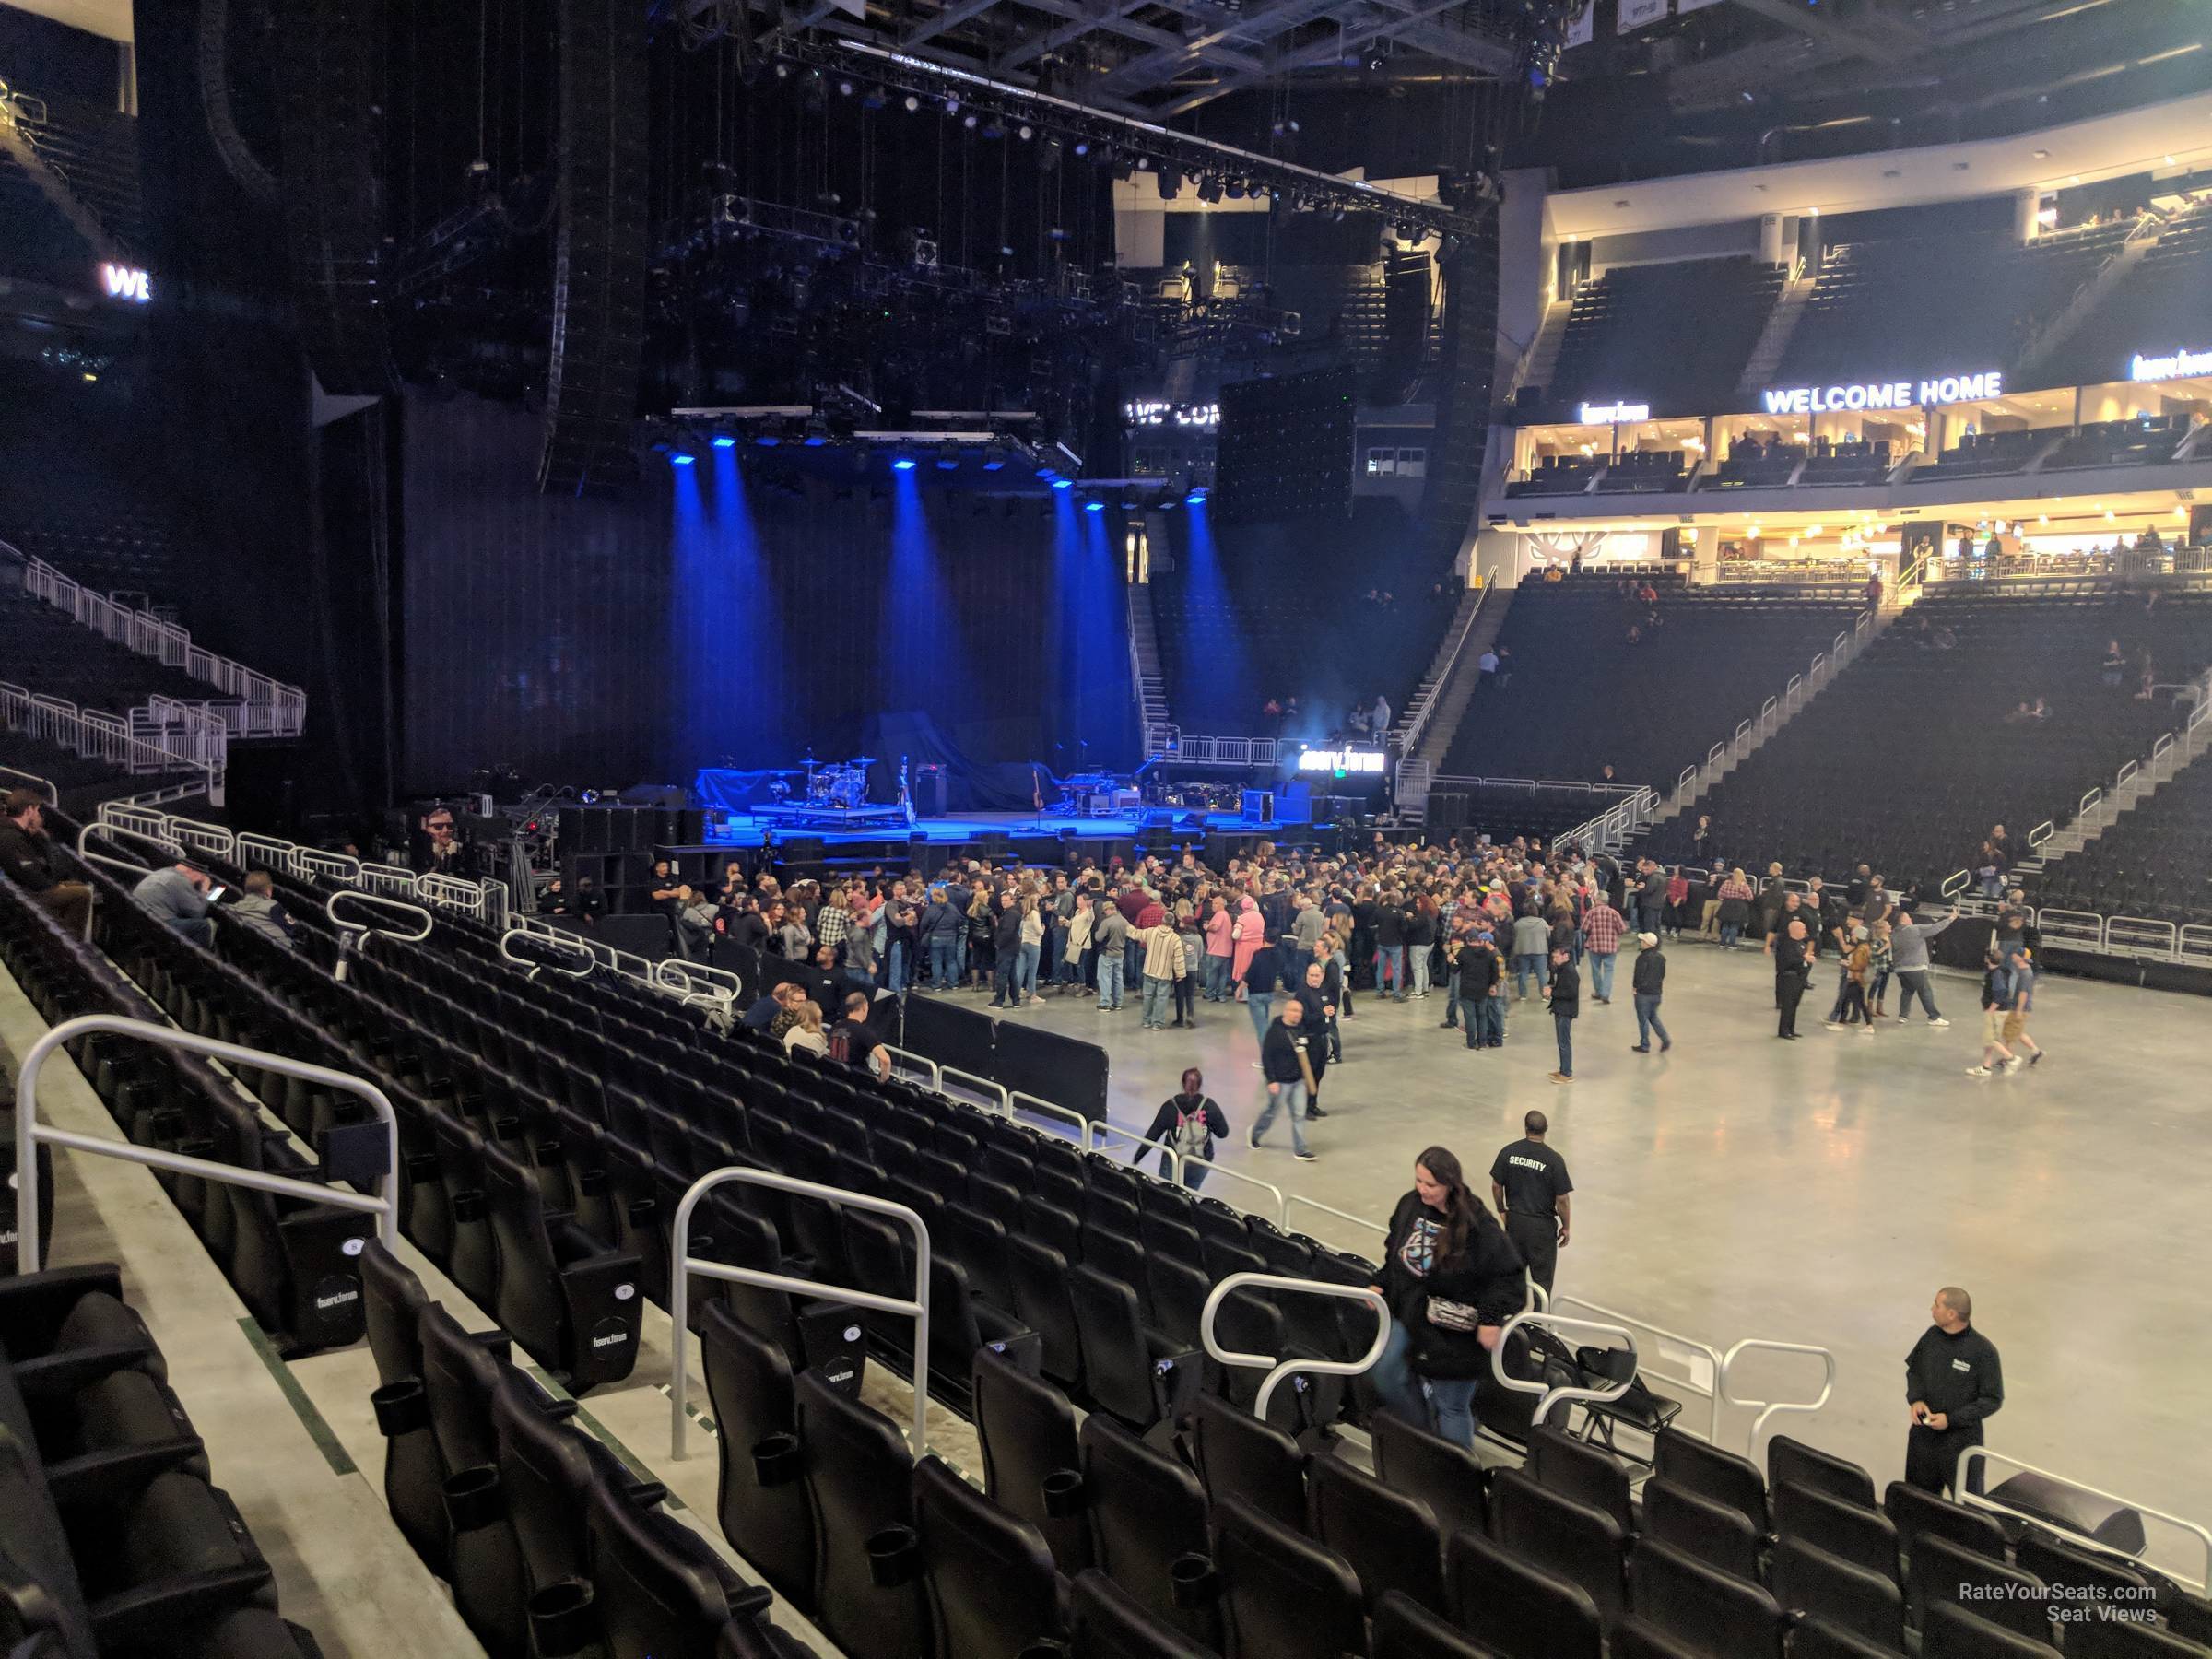 Section 105 at Fiserv Forum for Concerts